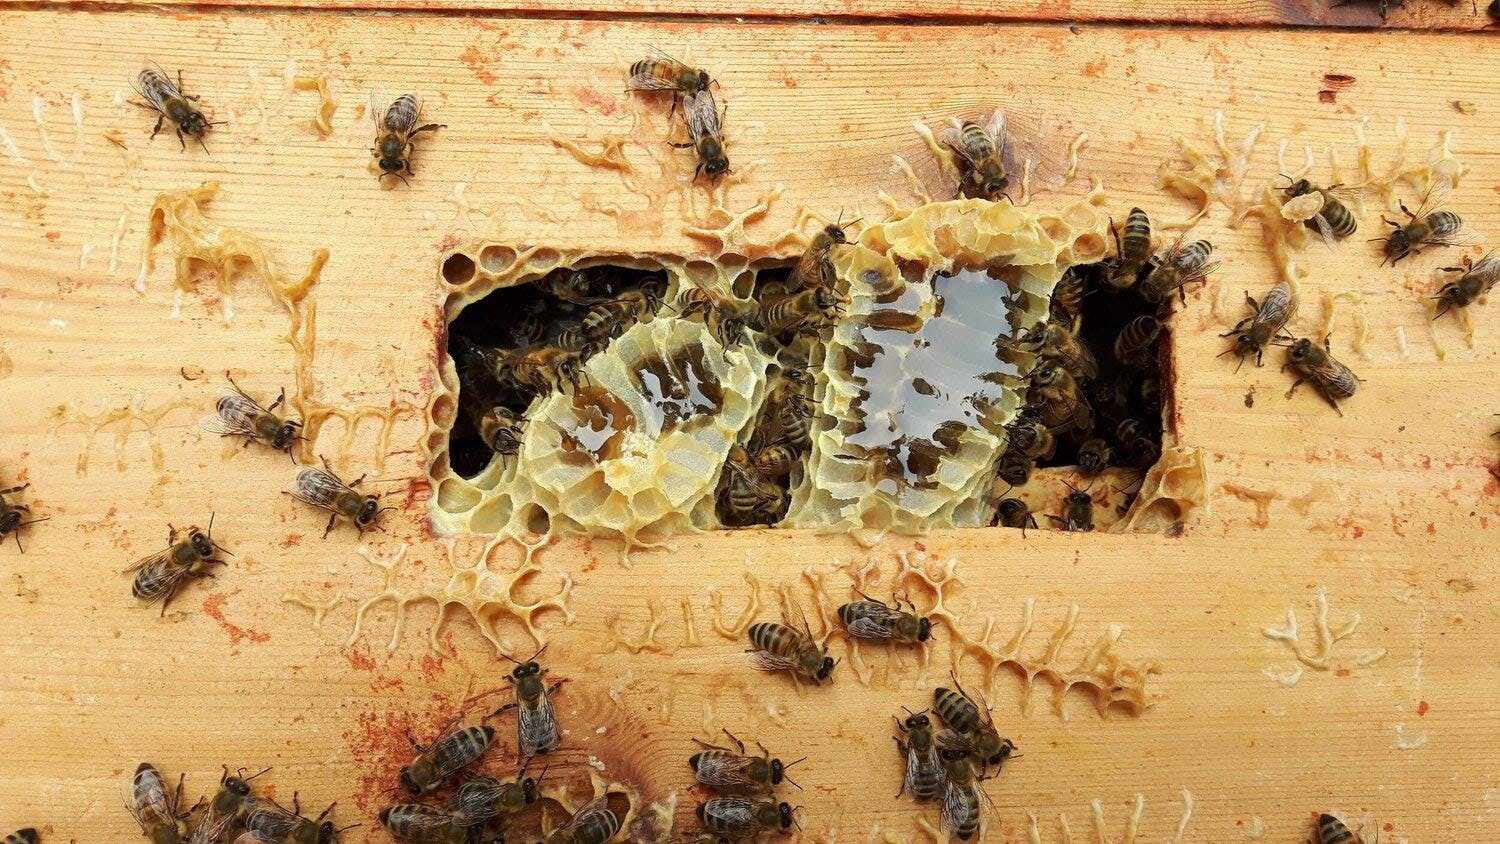 Bees in and around their hive oozing with honey, visible through a rectangular hole in a wooden box.